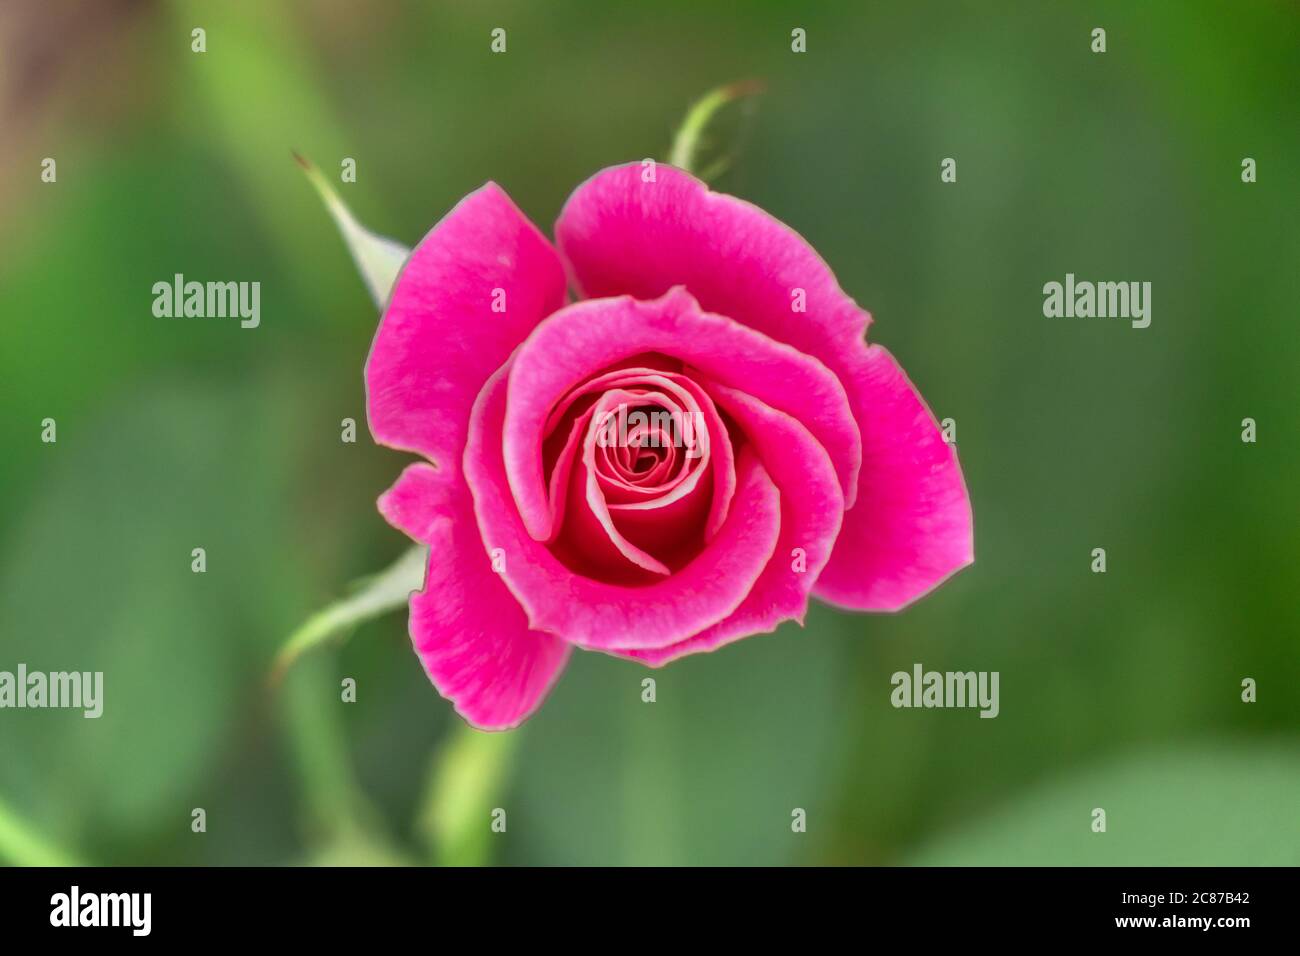 Beautiful pink rose over green burly background, selective focus Stock Photo